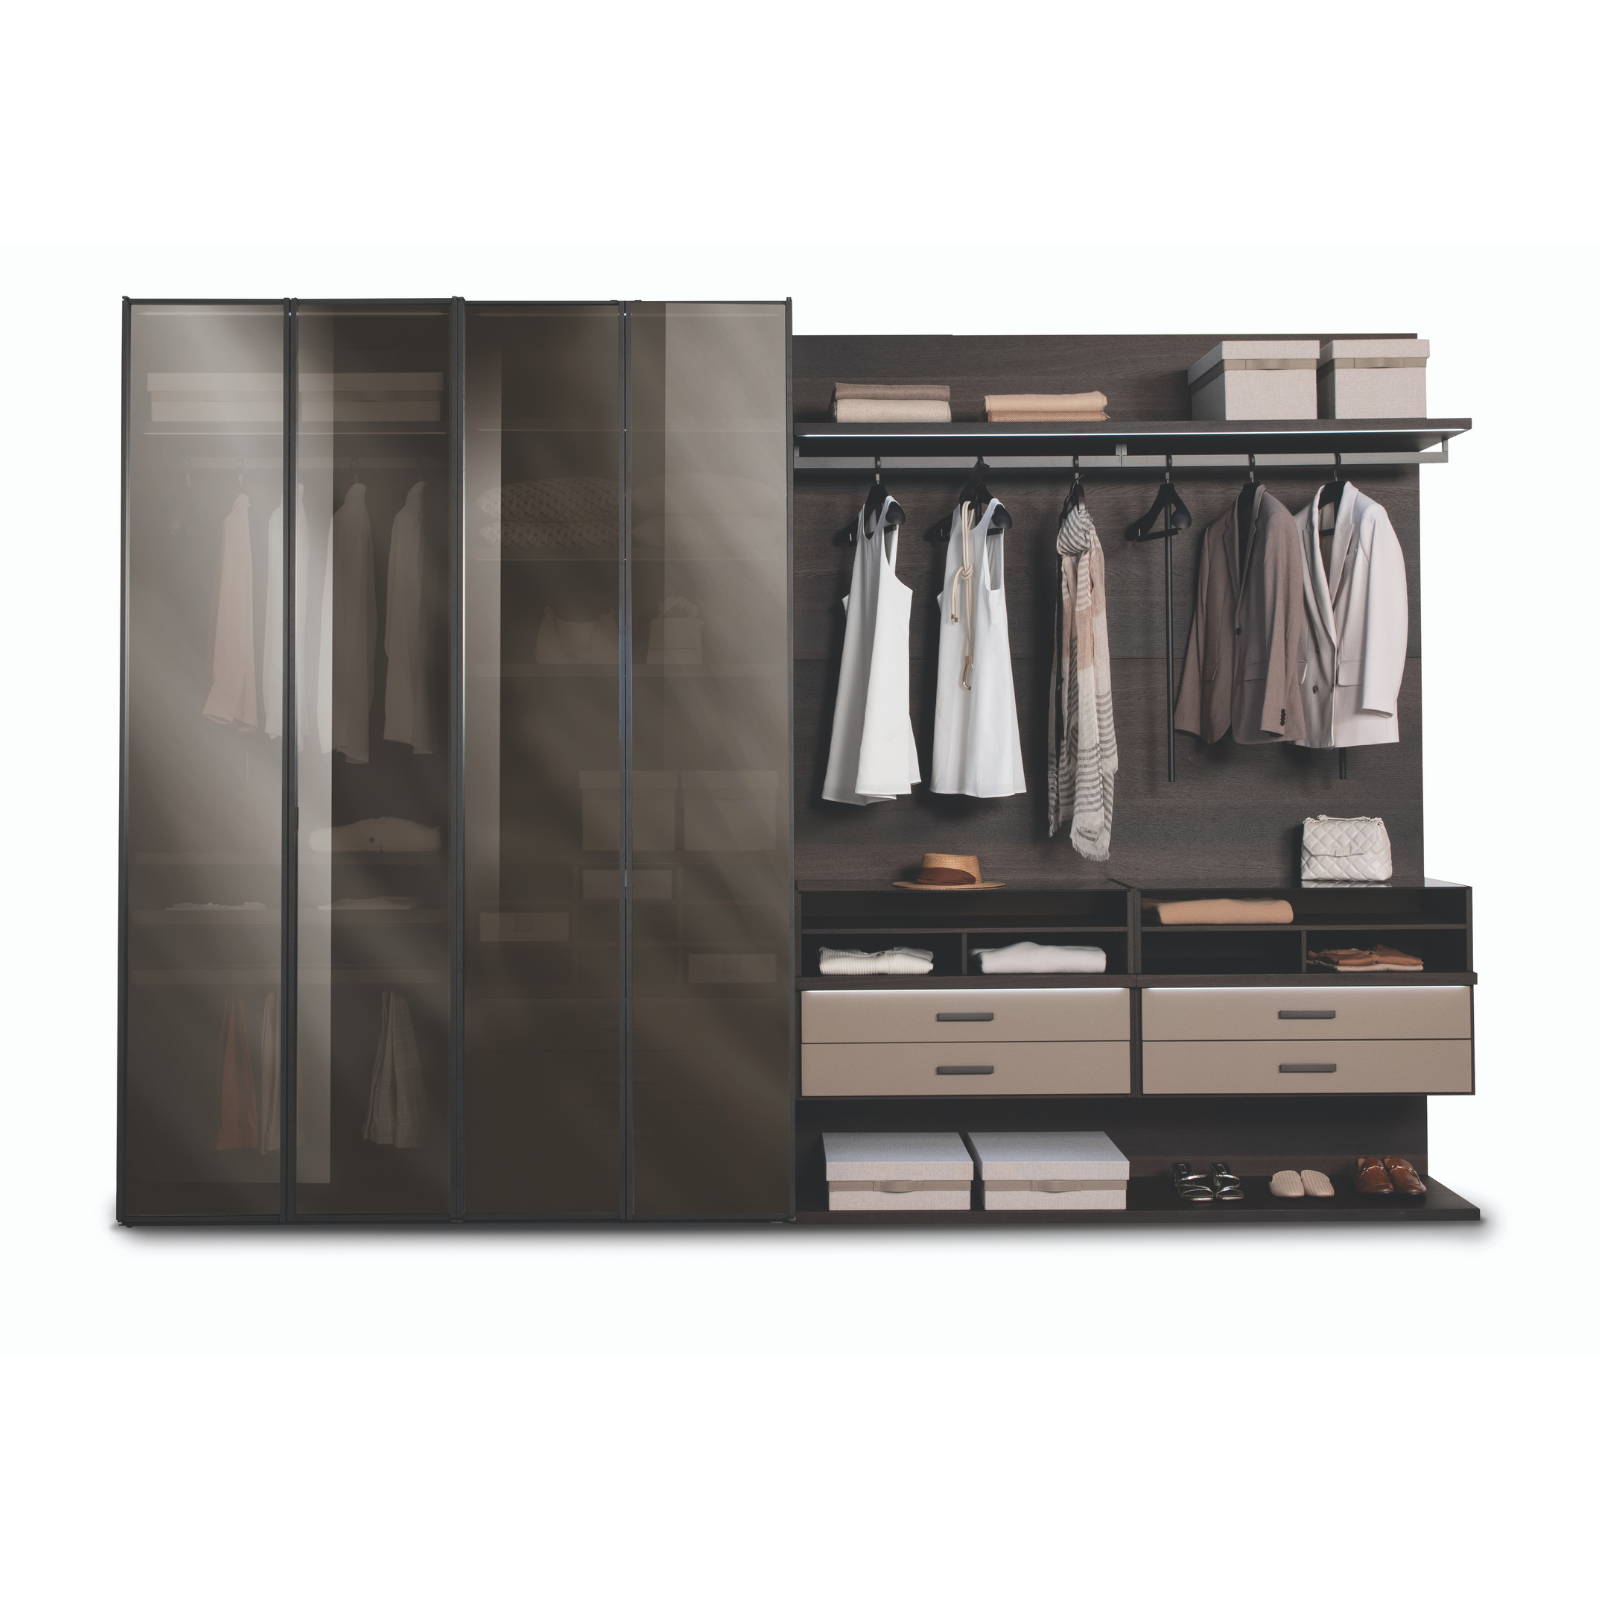 Ad Hoc night system is a tailor-made wardrobe and walk-in closet system which allows  everyone to be free to design his own individual space, creating around an intimate and elegant surrounding. Every single detail is customizable.